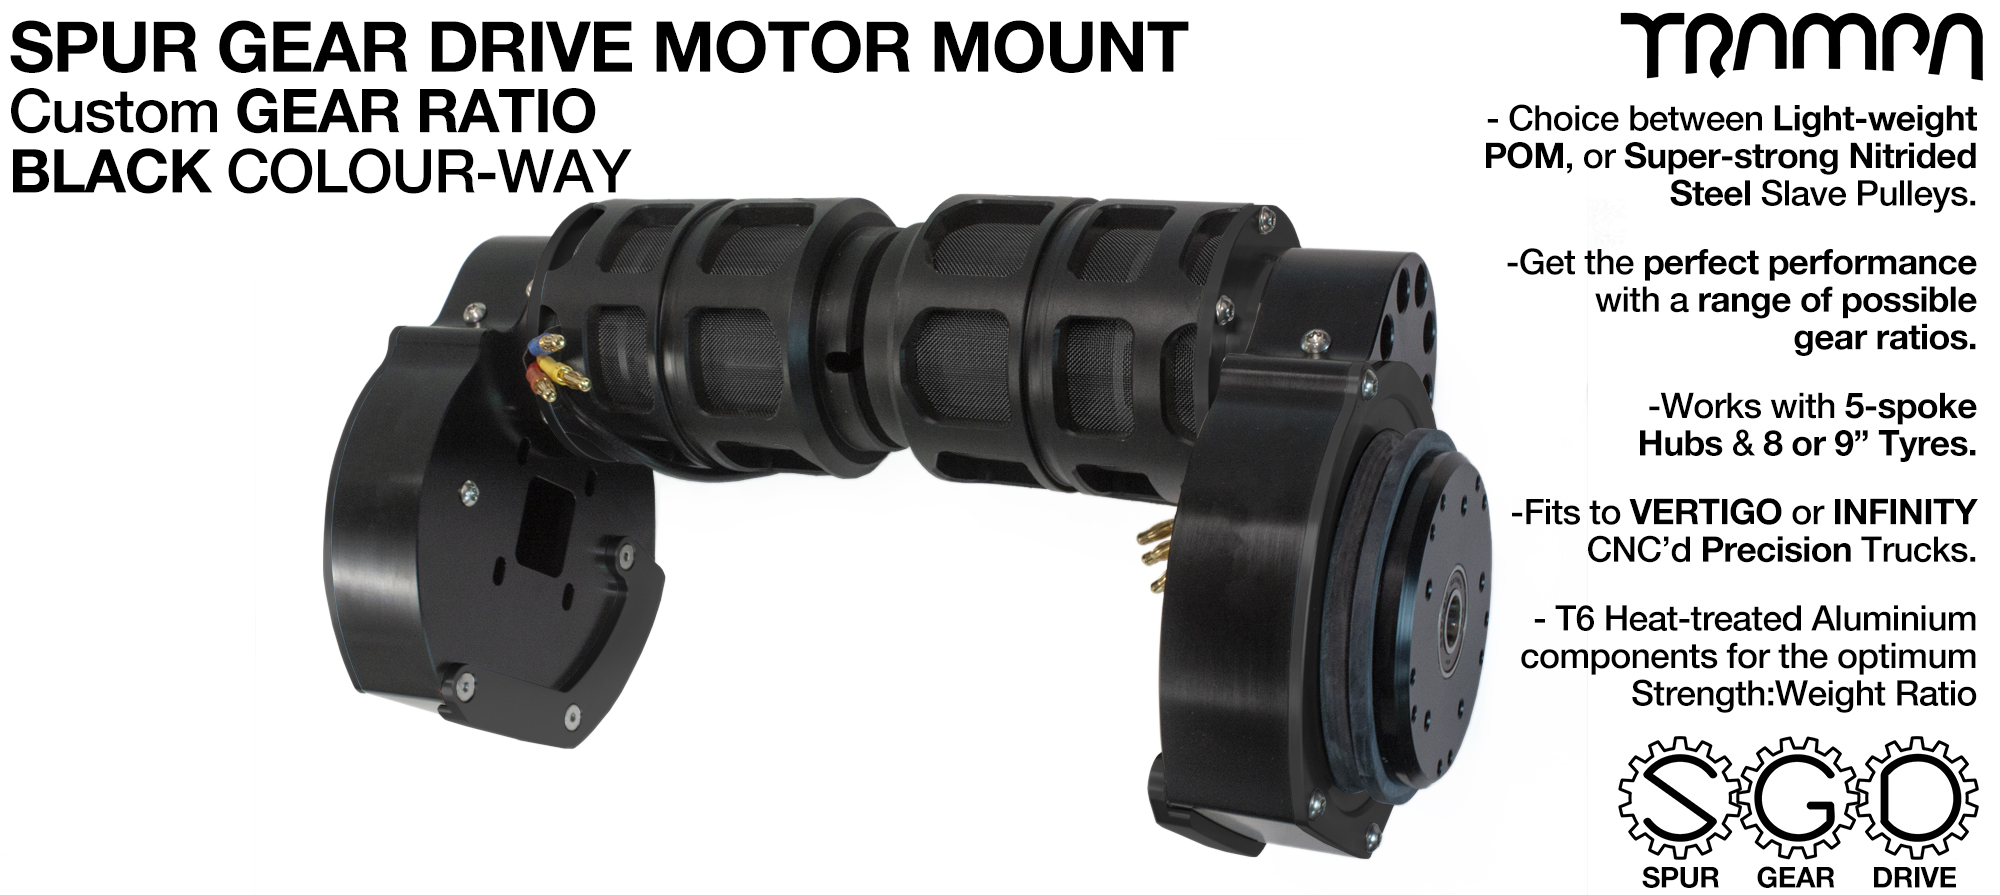 Mountainboard Spur Gear Drive TWIN Motor Mount with PULLEYS & FILTERS- BLACK